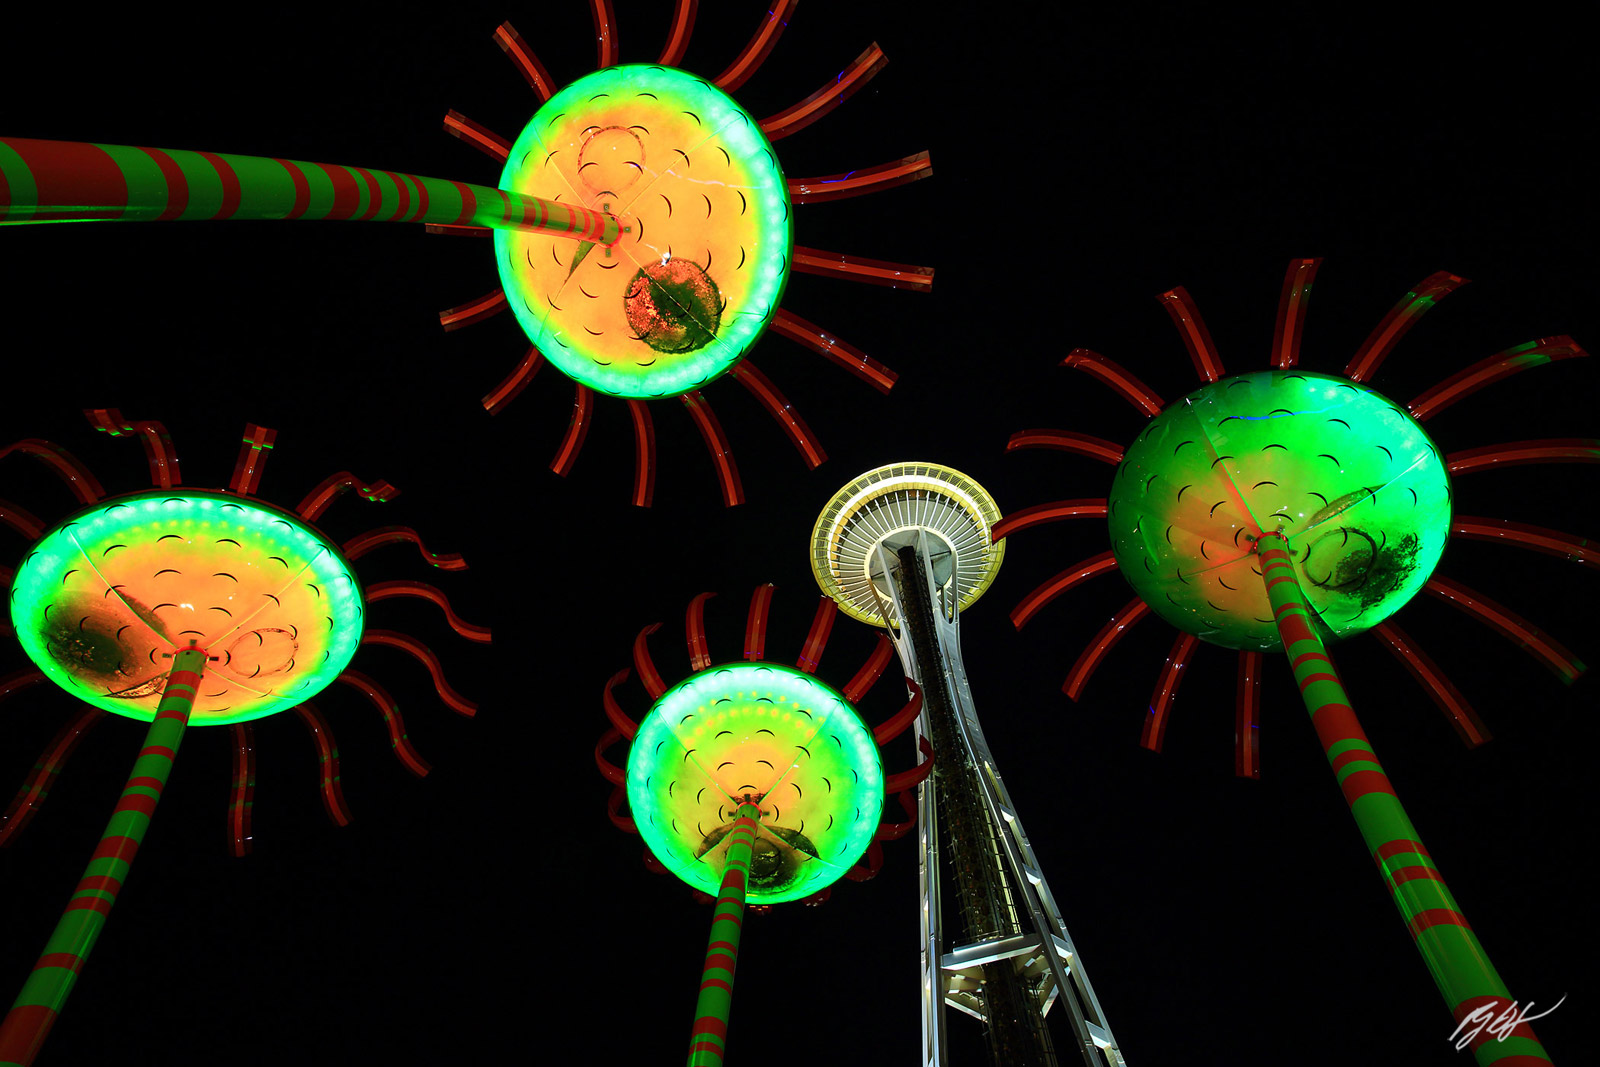 Giant Singing Flower Sculpture and the Space Needle in Seattle Center in Seattle Washington